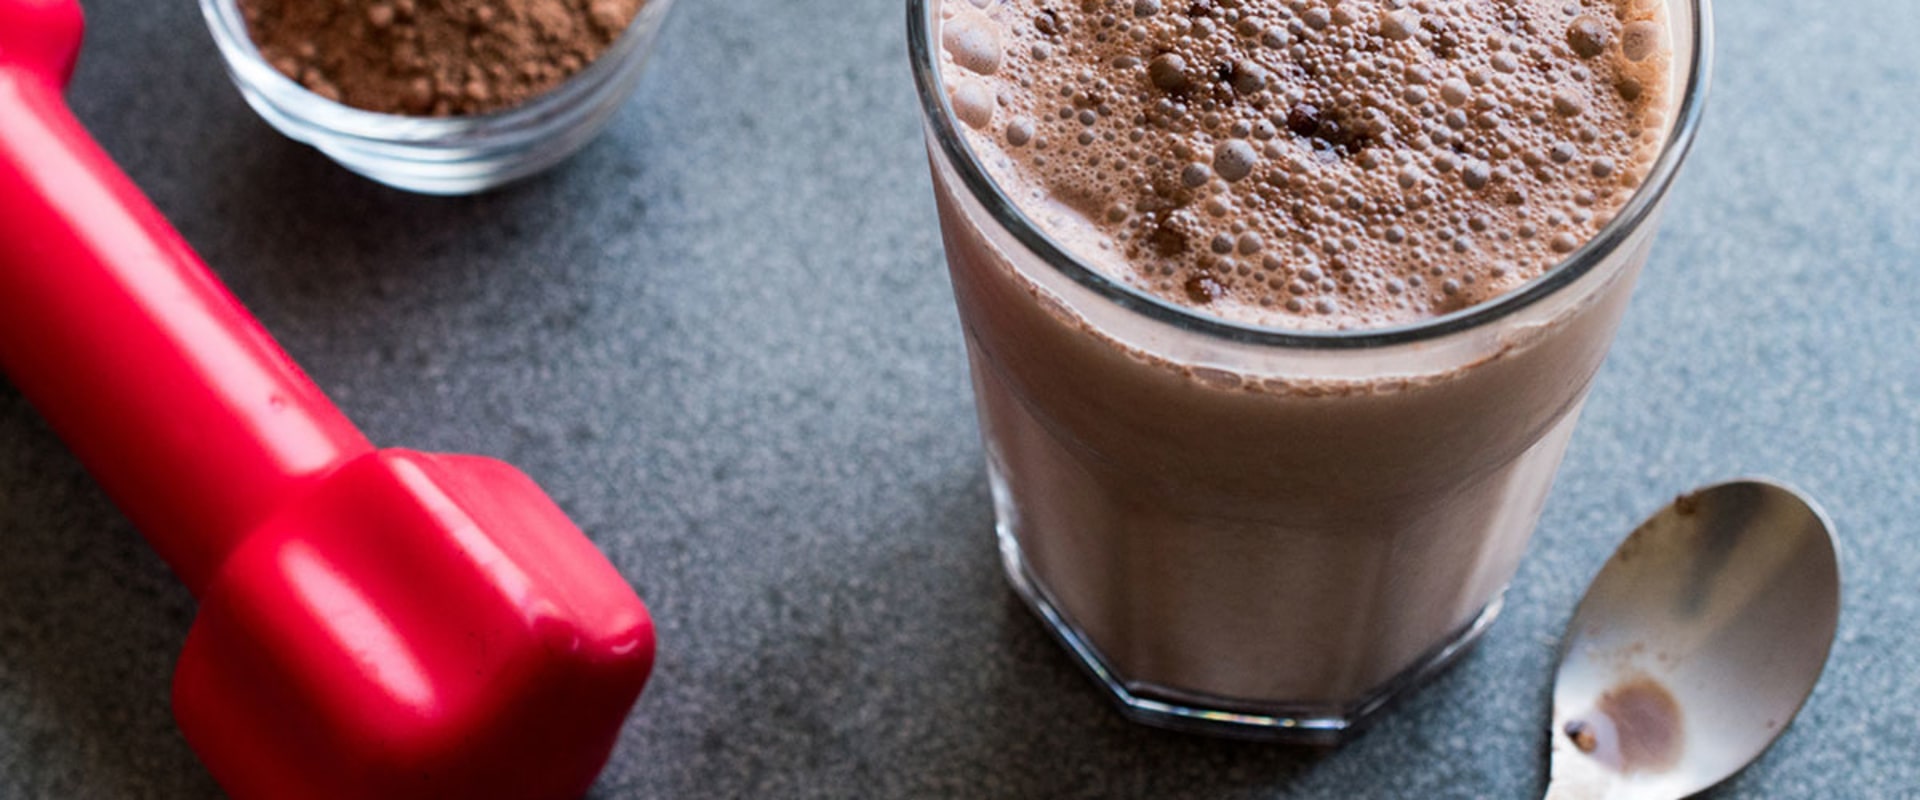 Are there any health risks with protein shakes?